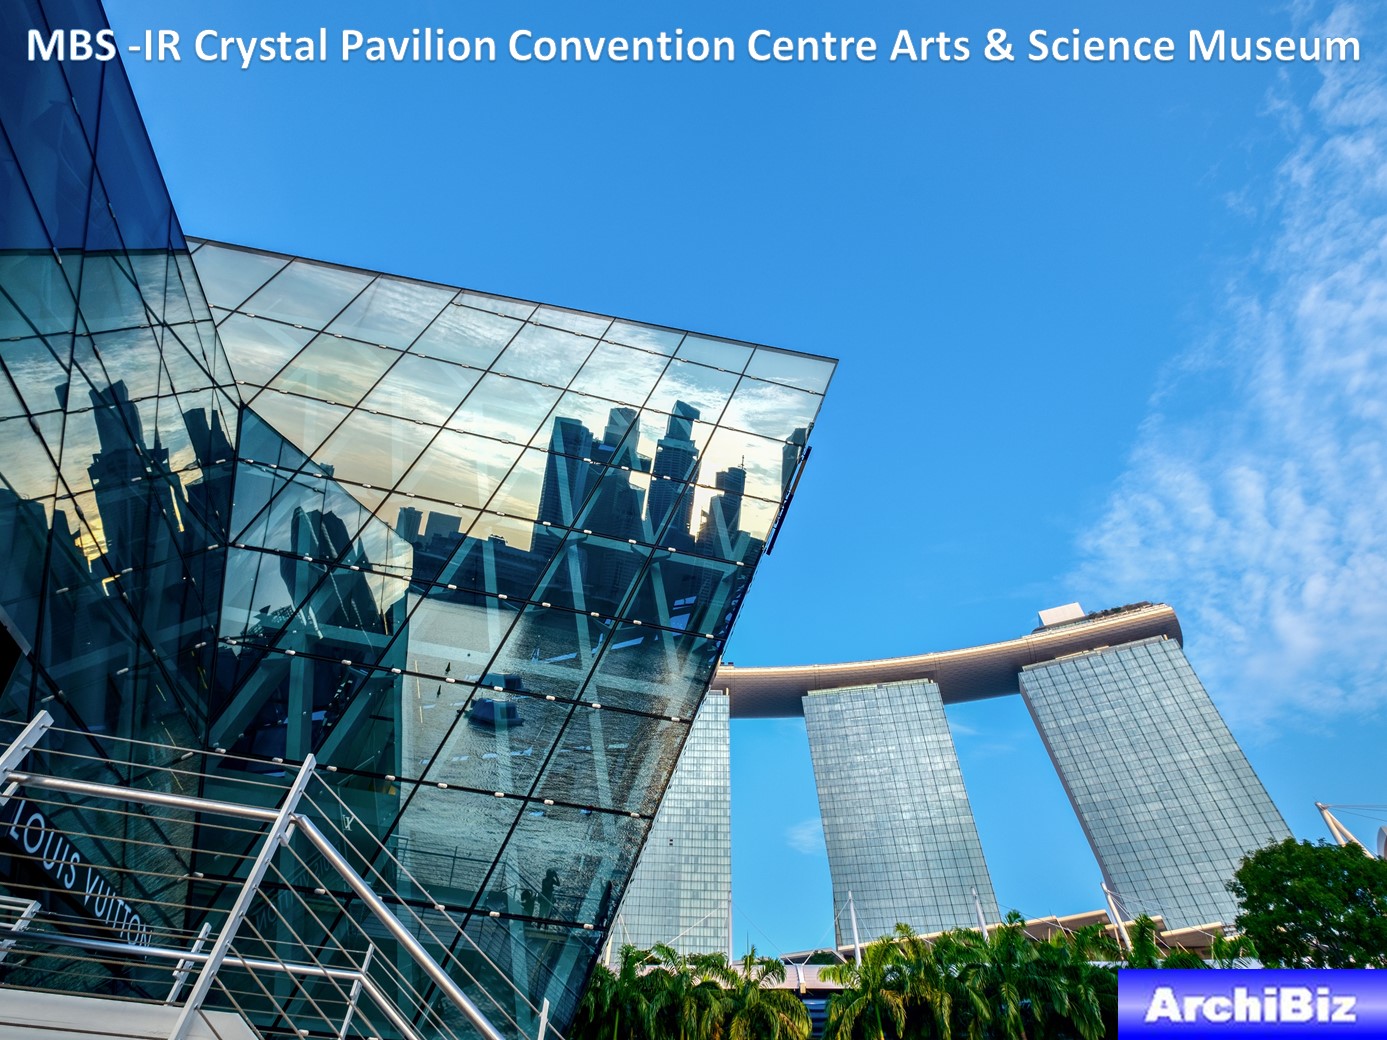 MBS -IR Crystal Pavilion Convention Centre Arts & Science Museum (16)